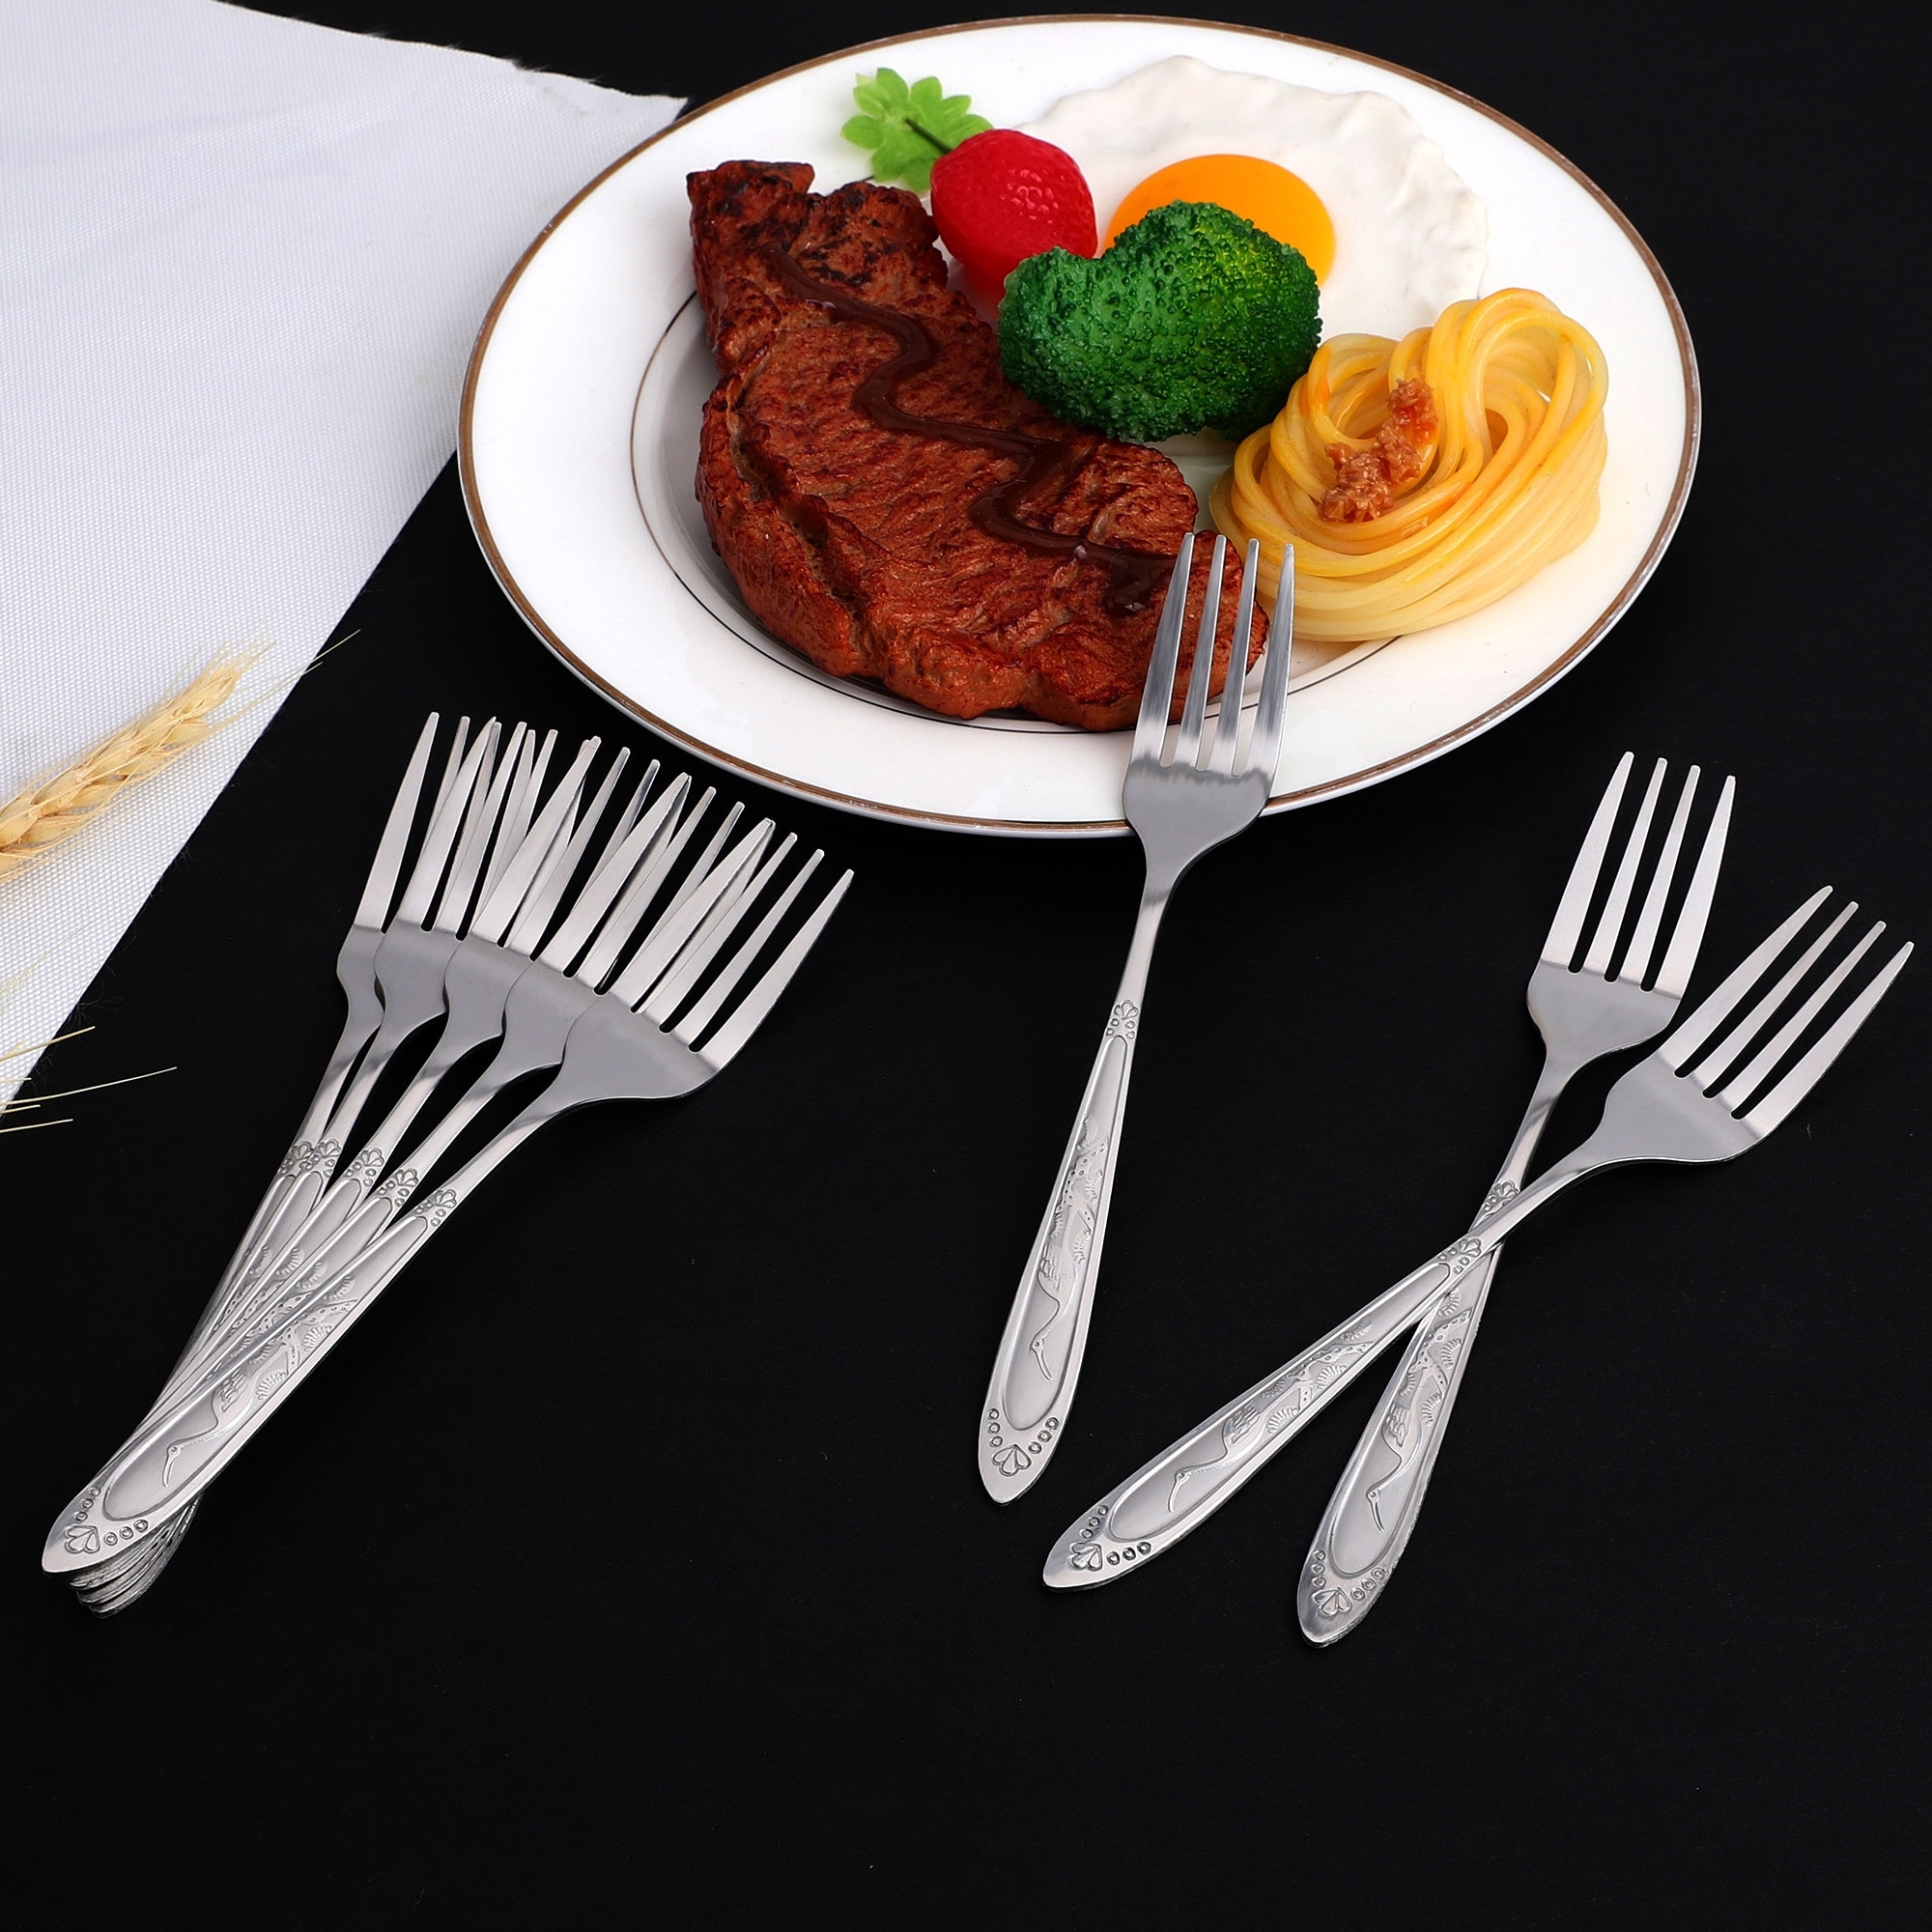 https://ak1.ostkcdn.com/images/products/is/images/direct/2b690378c040906a276c0e098a91b6332d2d8e66/Household-Tableware-Stainless-Steel-Dinner-Fork-7.3-Inches-Length-10-Pcs.jpg